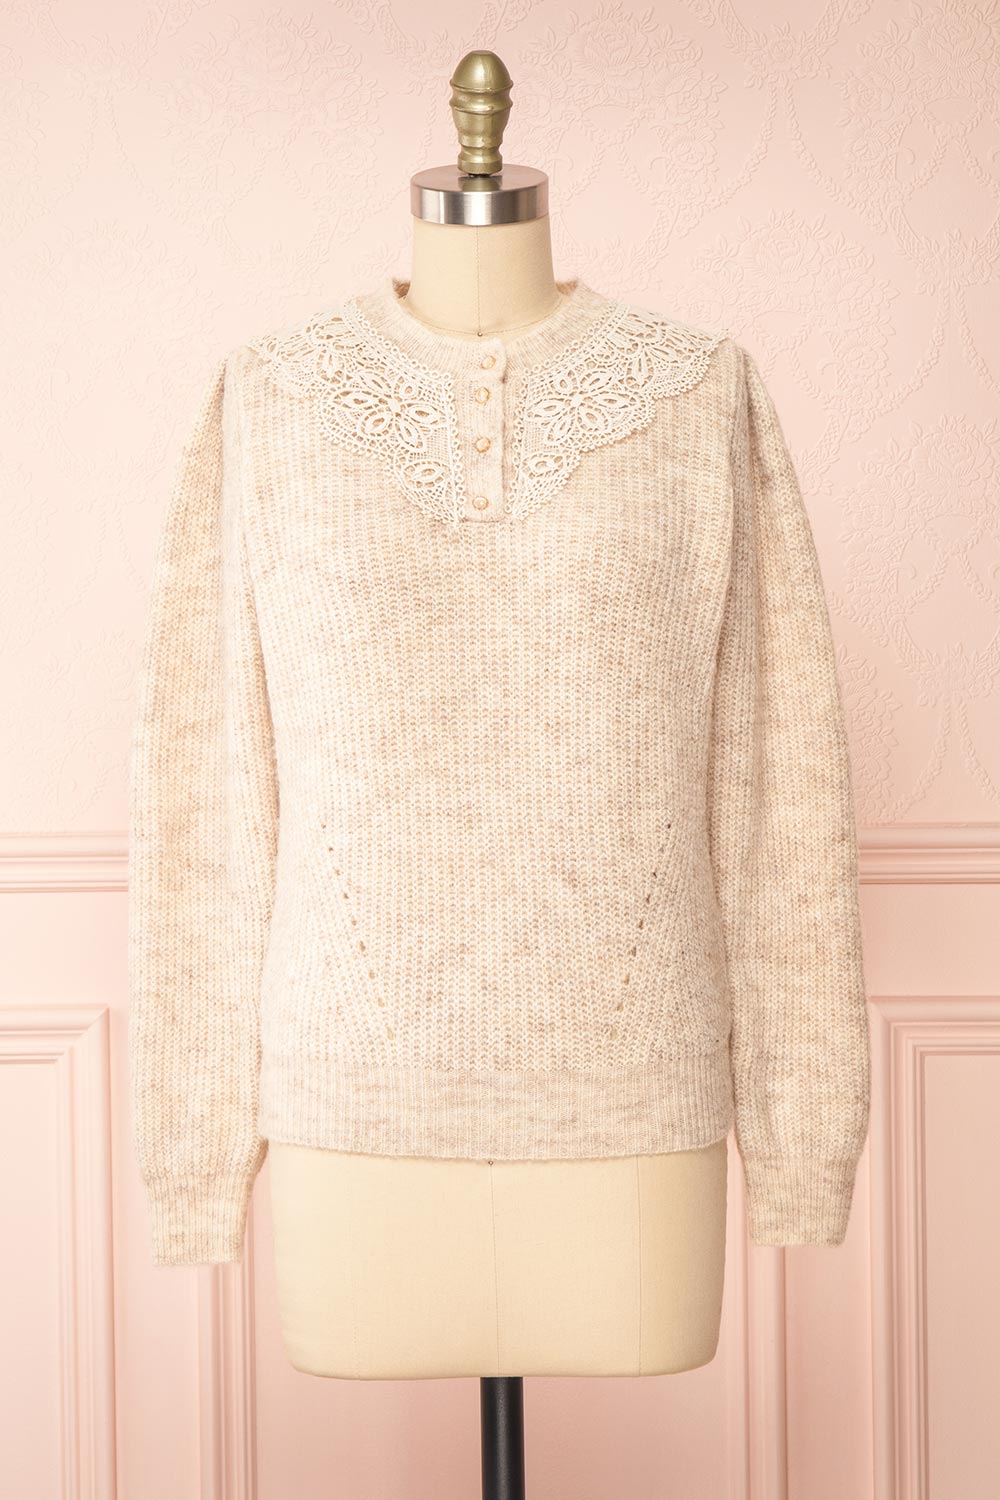 Reagan Beige Buttoned Collar Sweater w/ Lace | Boutique 1861 front view